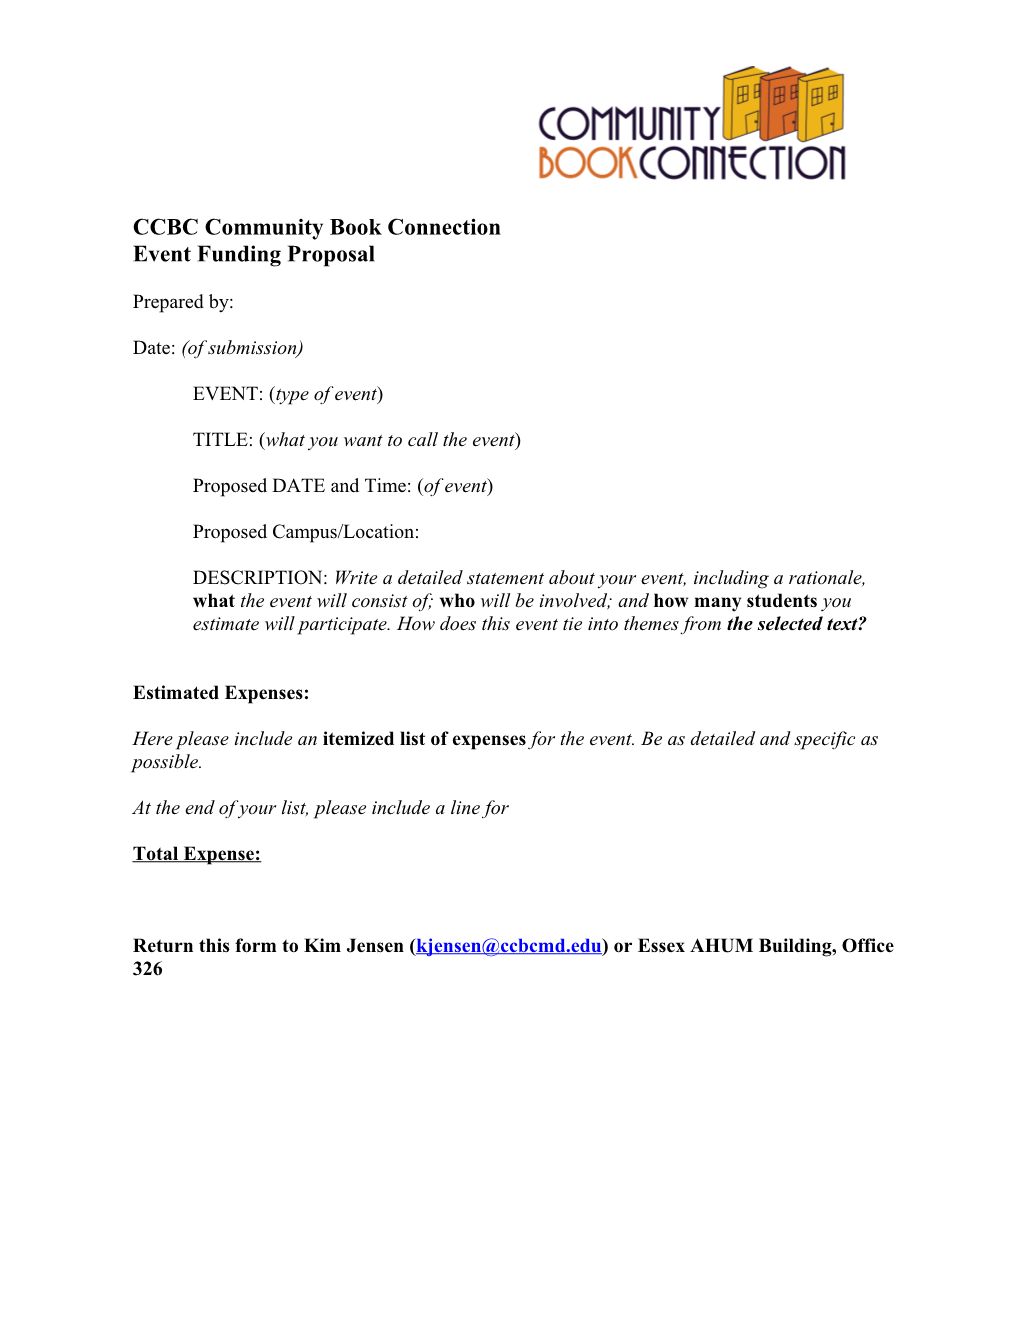 CCBC Community Book Connection